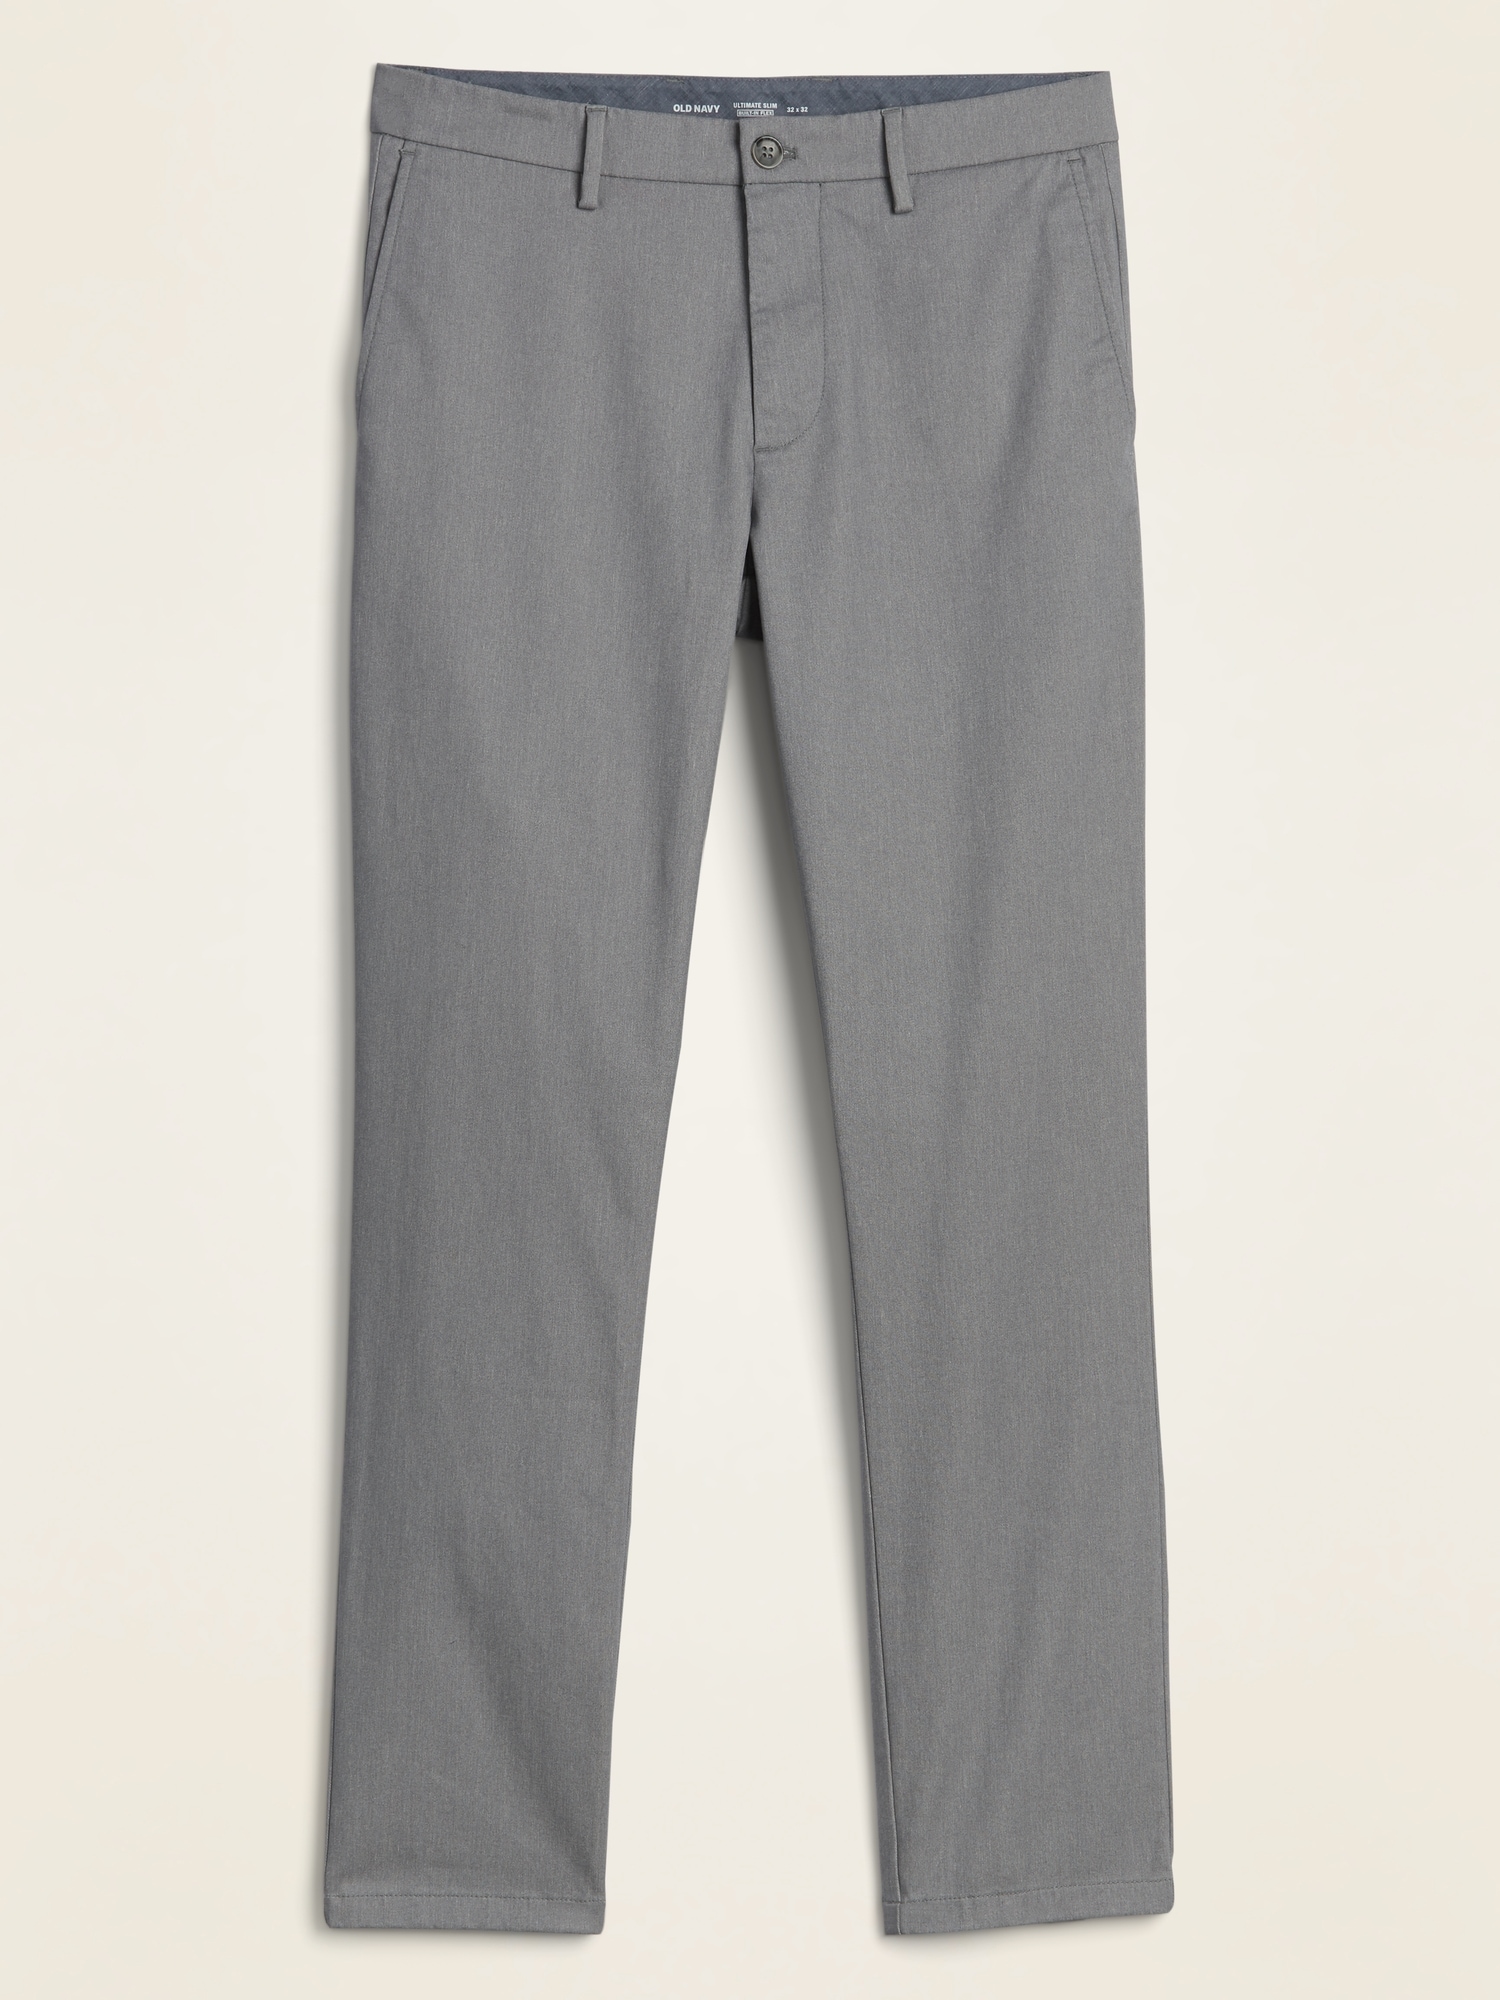 Slim Ultimate Built-In Flex Textured Chino Pants | Old Navy